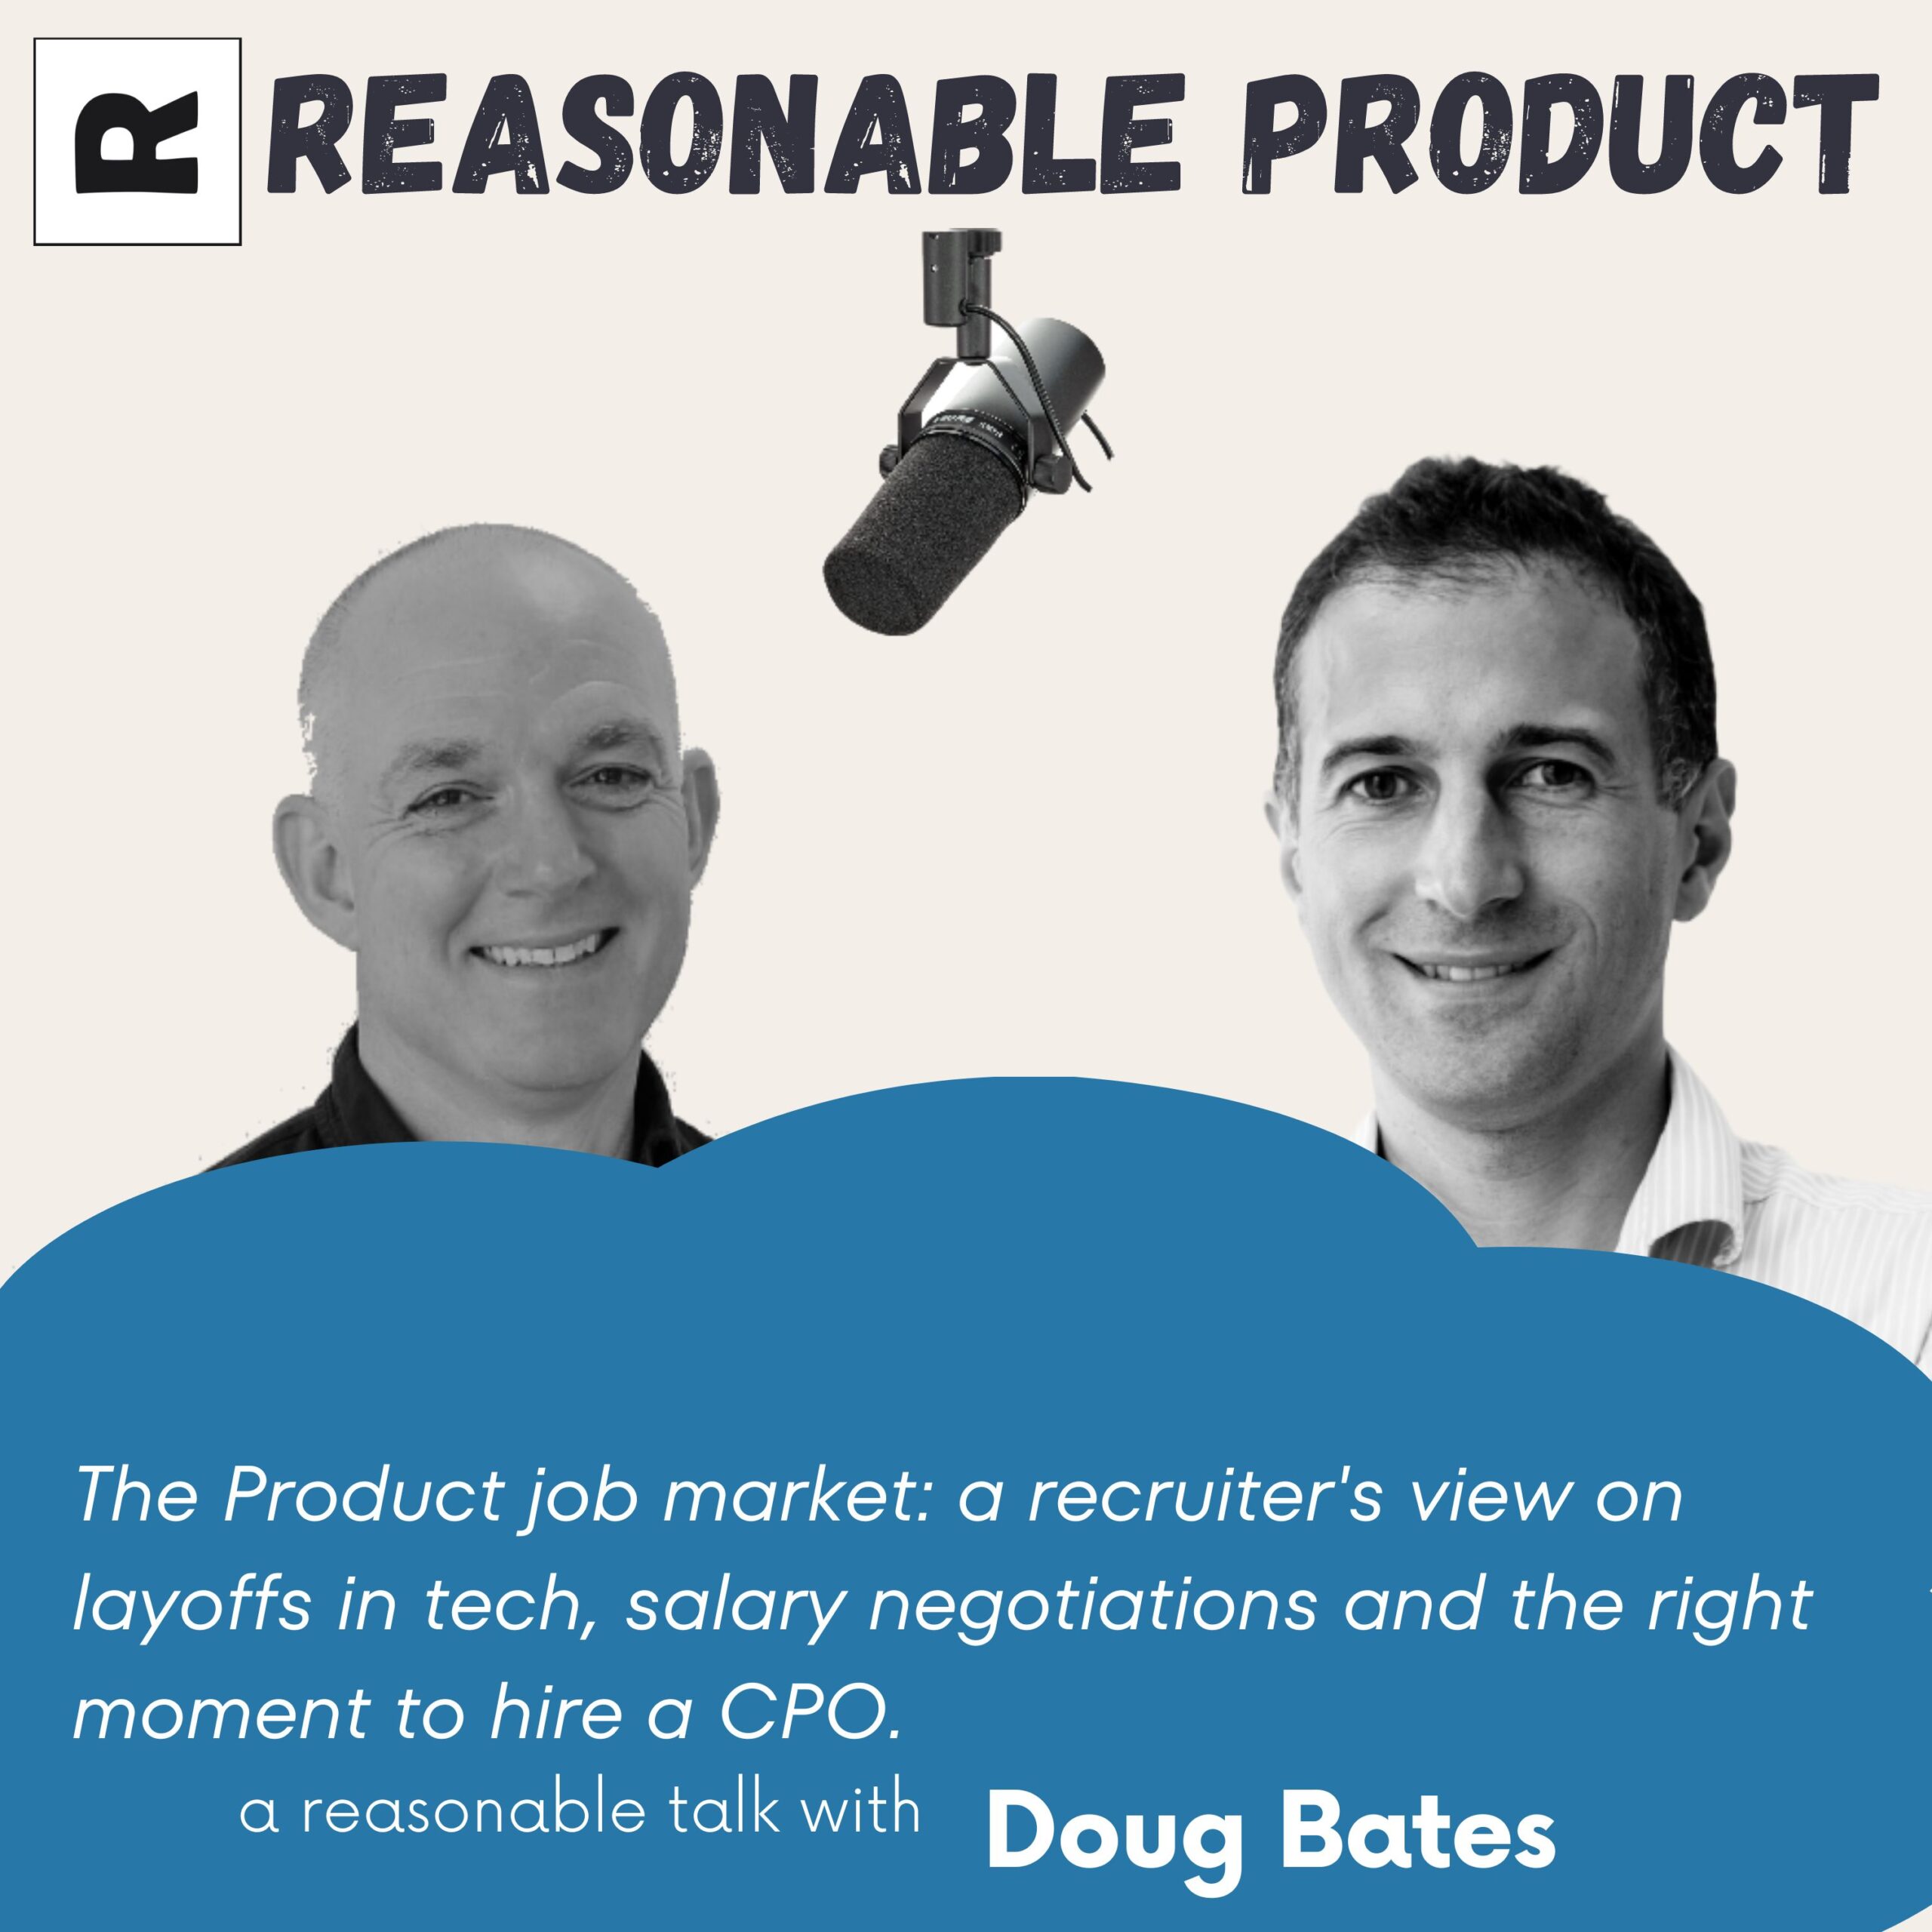 A recruiter's view on the job market for product management: layoffs, salary negotiations and hiring tips - with Doug Bates (Intelligent People)